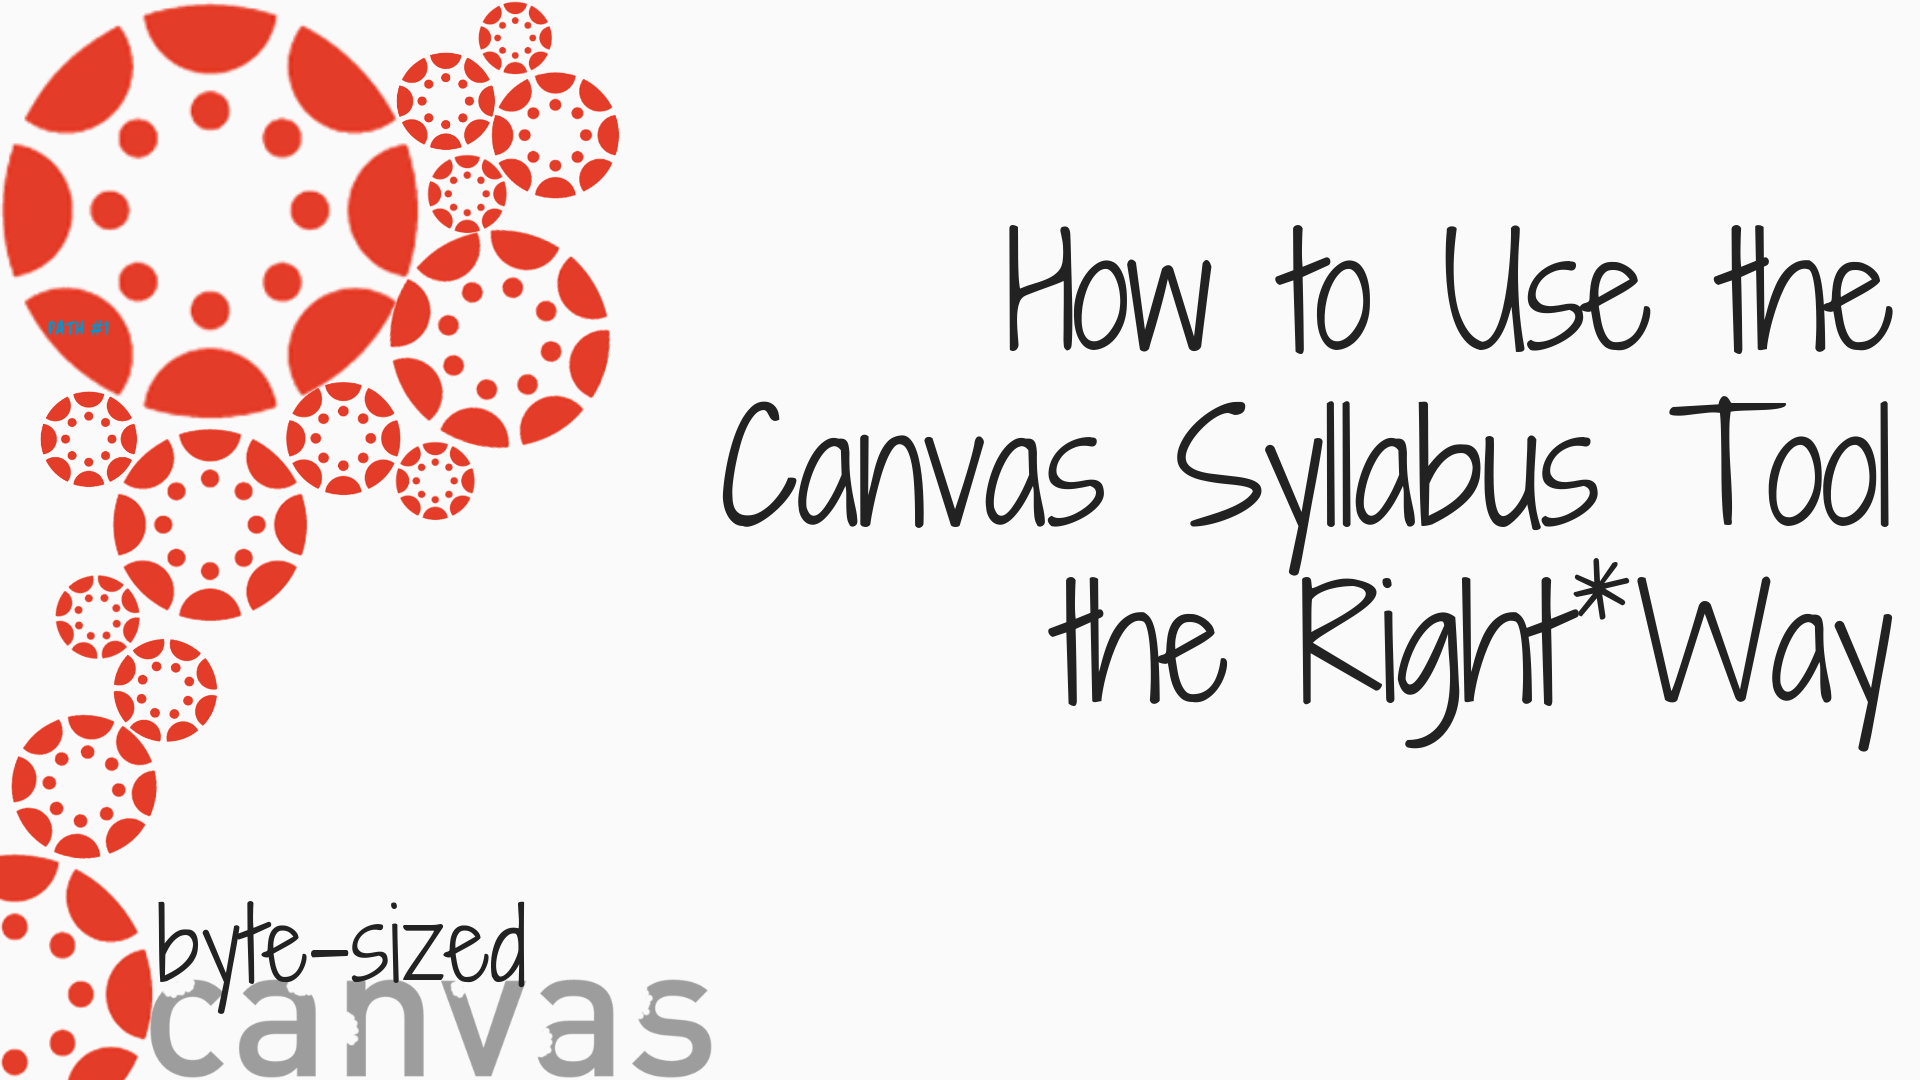 how-to-use-the-canvas-syllabus-the-right-way-online-network-of-educators